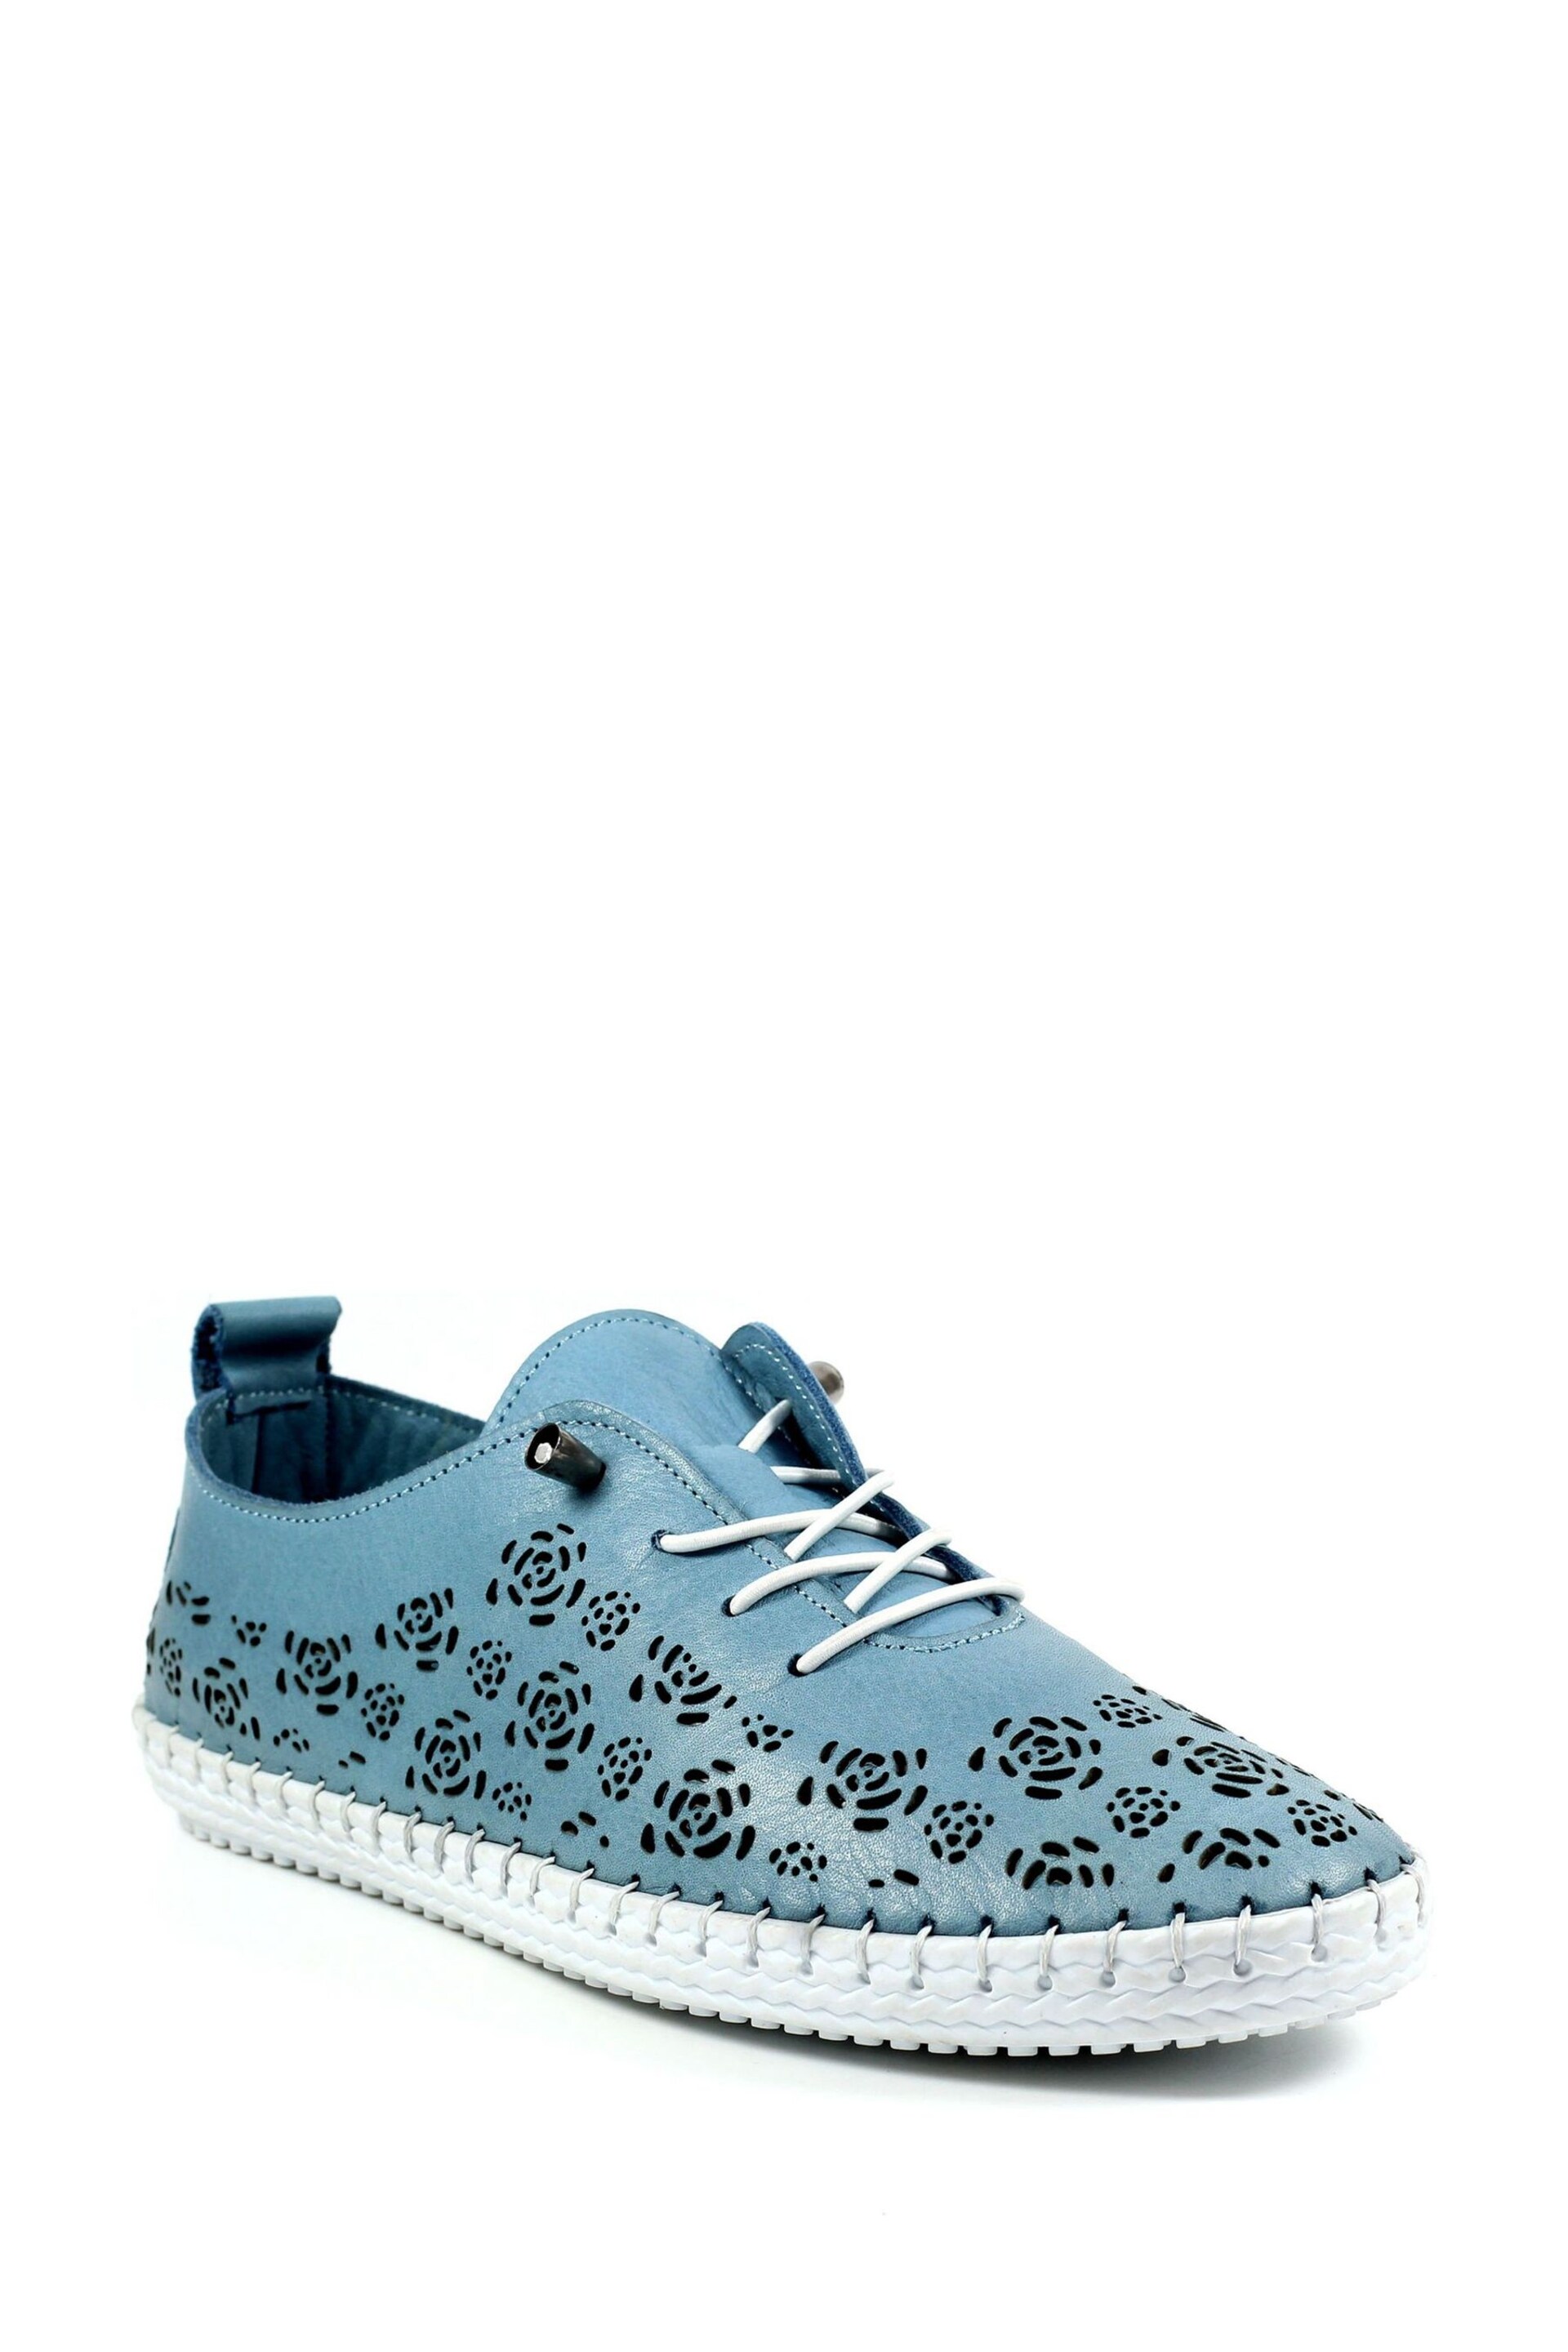 Lunar Bamburgh Leather Plimsoll Shoes - Image 1 of 8